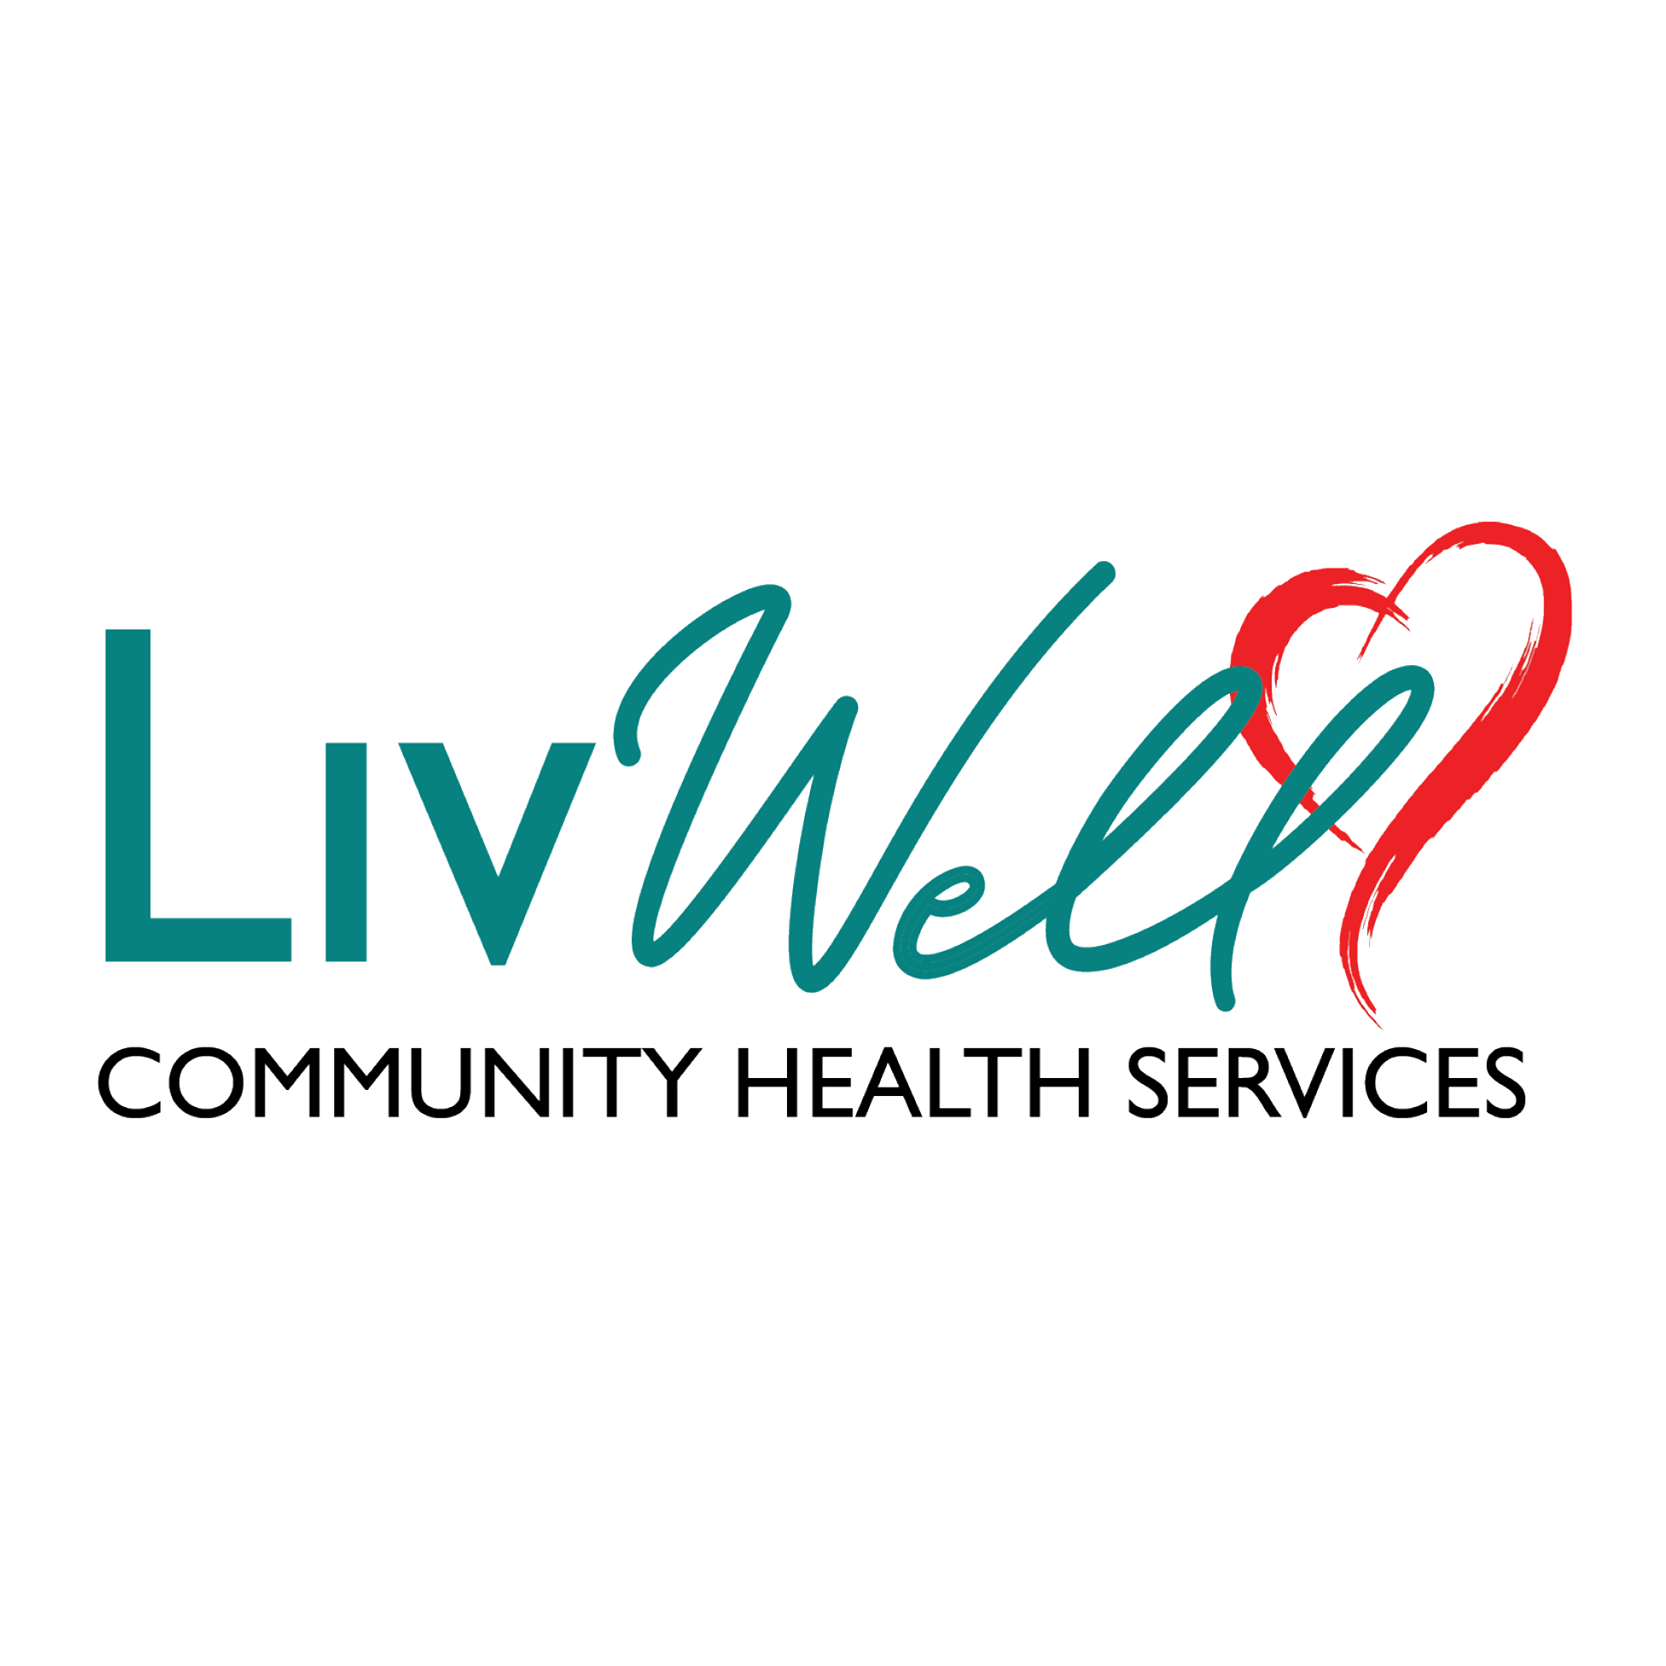 LivWell Community Health Services